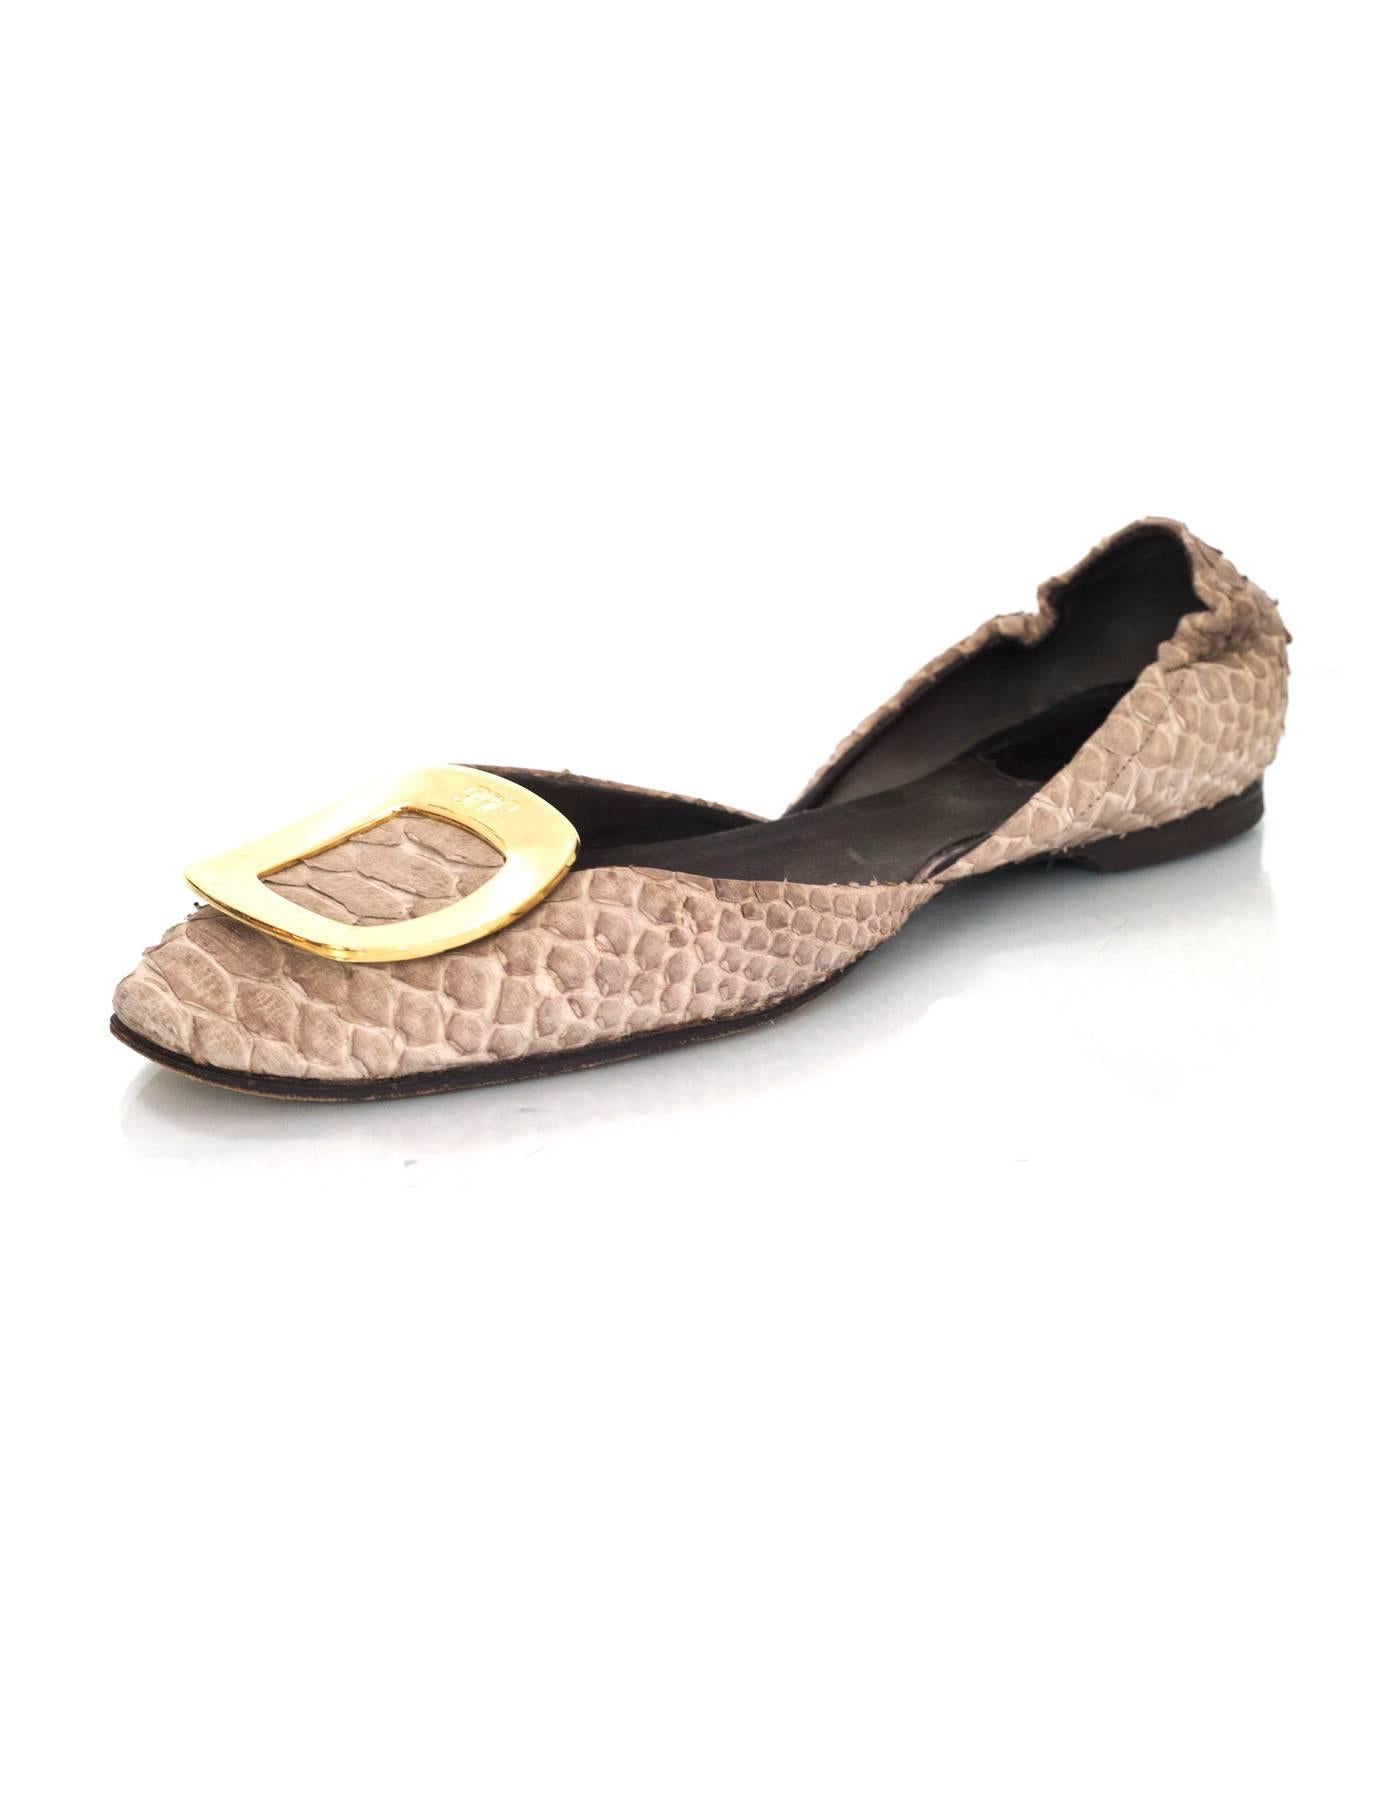 Roger Vivier Taupe Python Flats Sz 38

Made In: Italy
Color: Taupe, gold
Materials: Python, metal
Closure/Opening: Slide on
Sole Stamp: Made in Italy Women's size 38
Overall Condition: Very good pre-owned condition with the exception of wear at